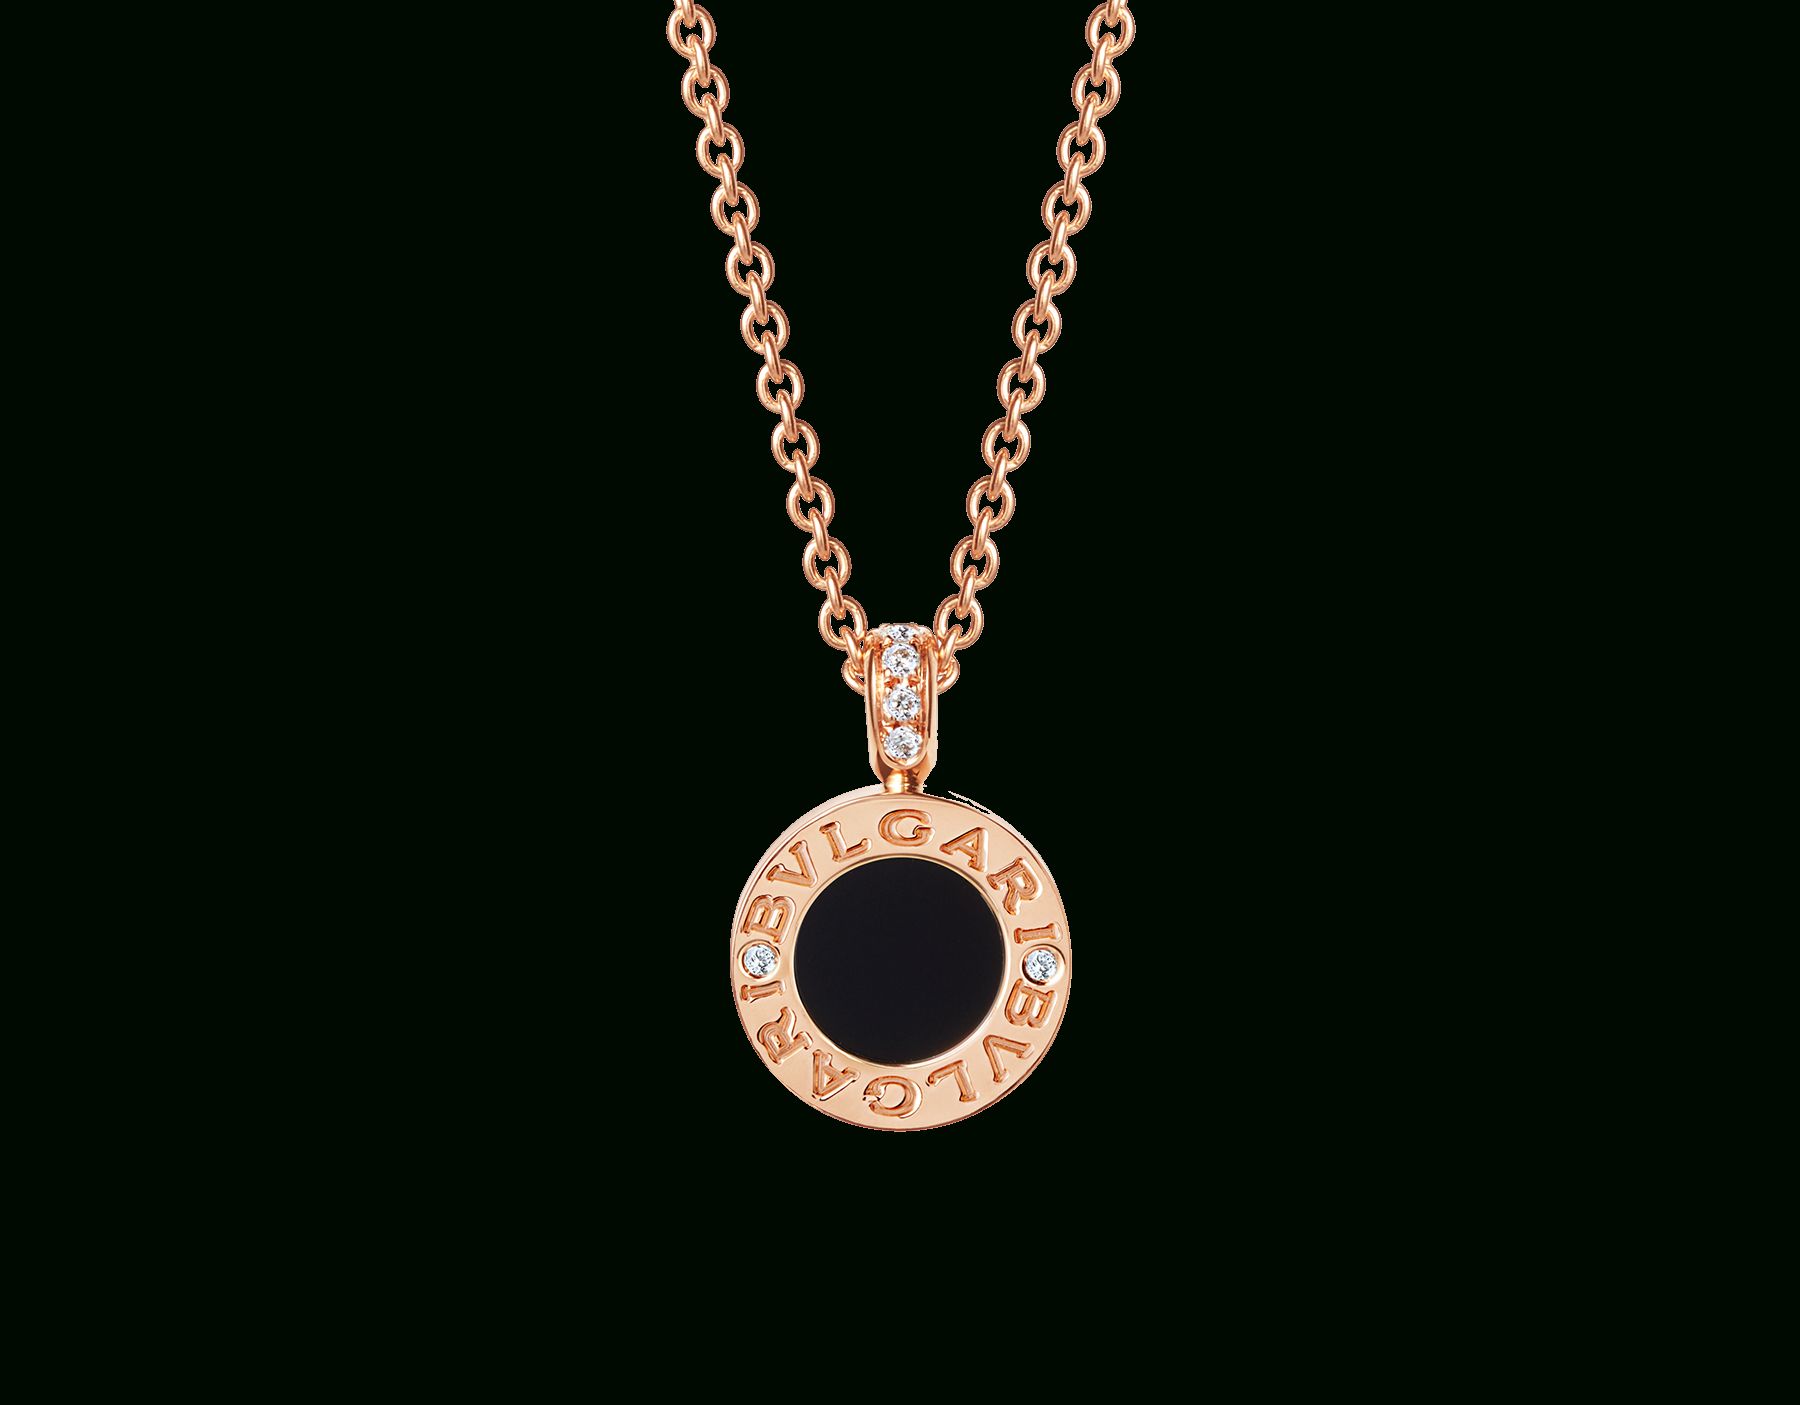 Bvlgari Bvlgari Necklace In Current Heart Fan Pendant Necklaces (View 20 of 25)